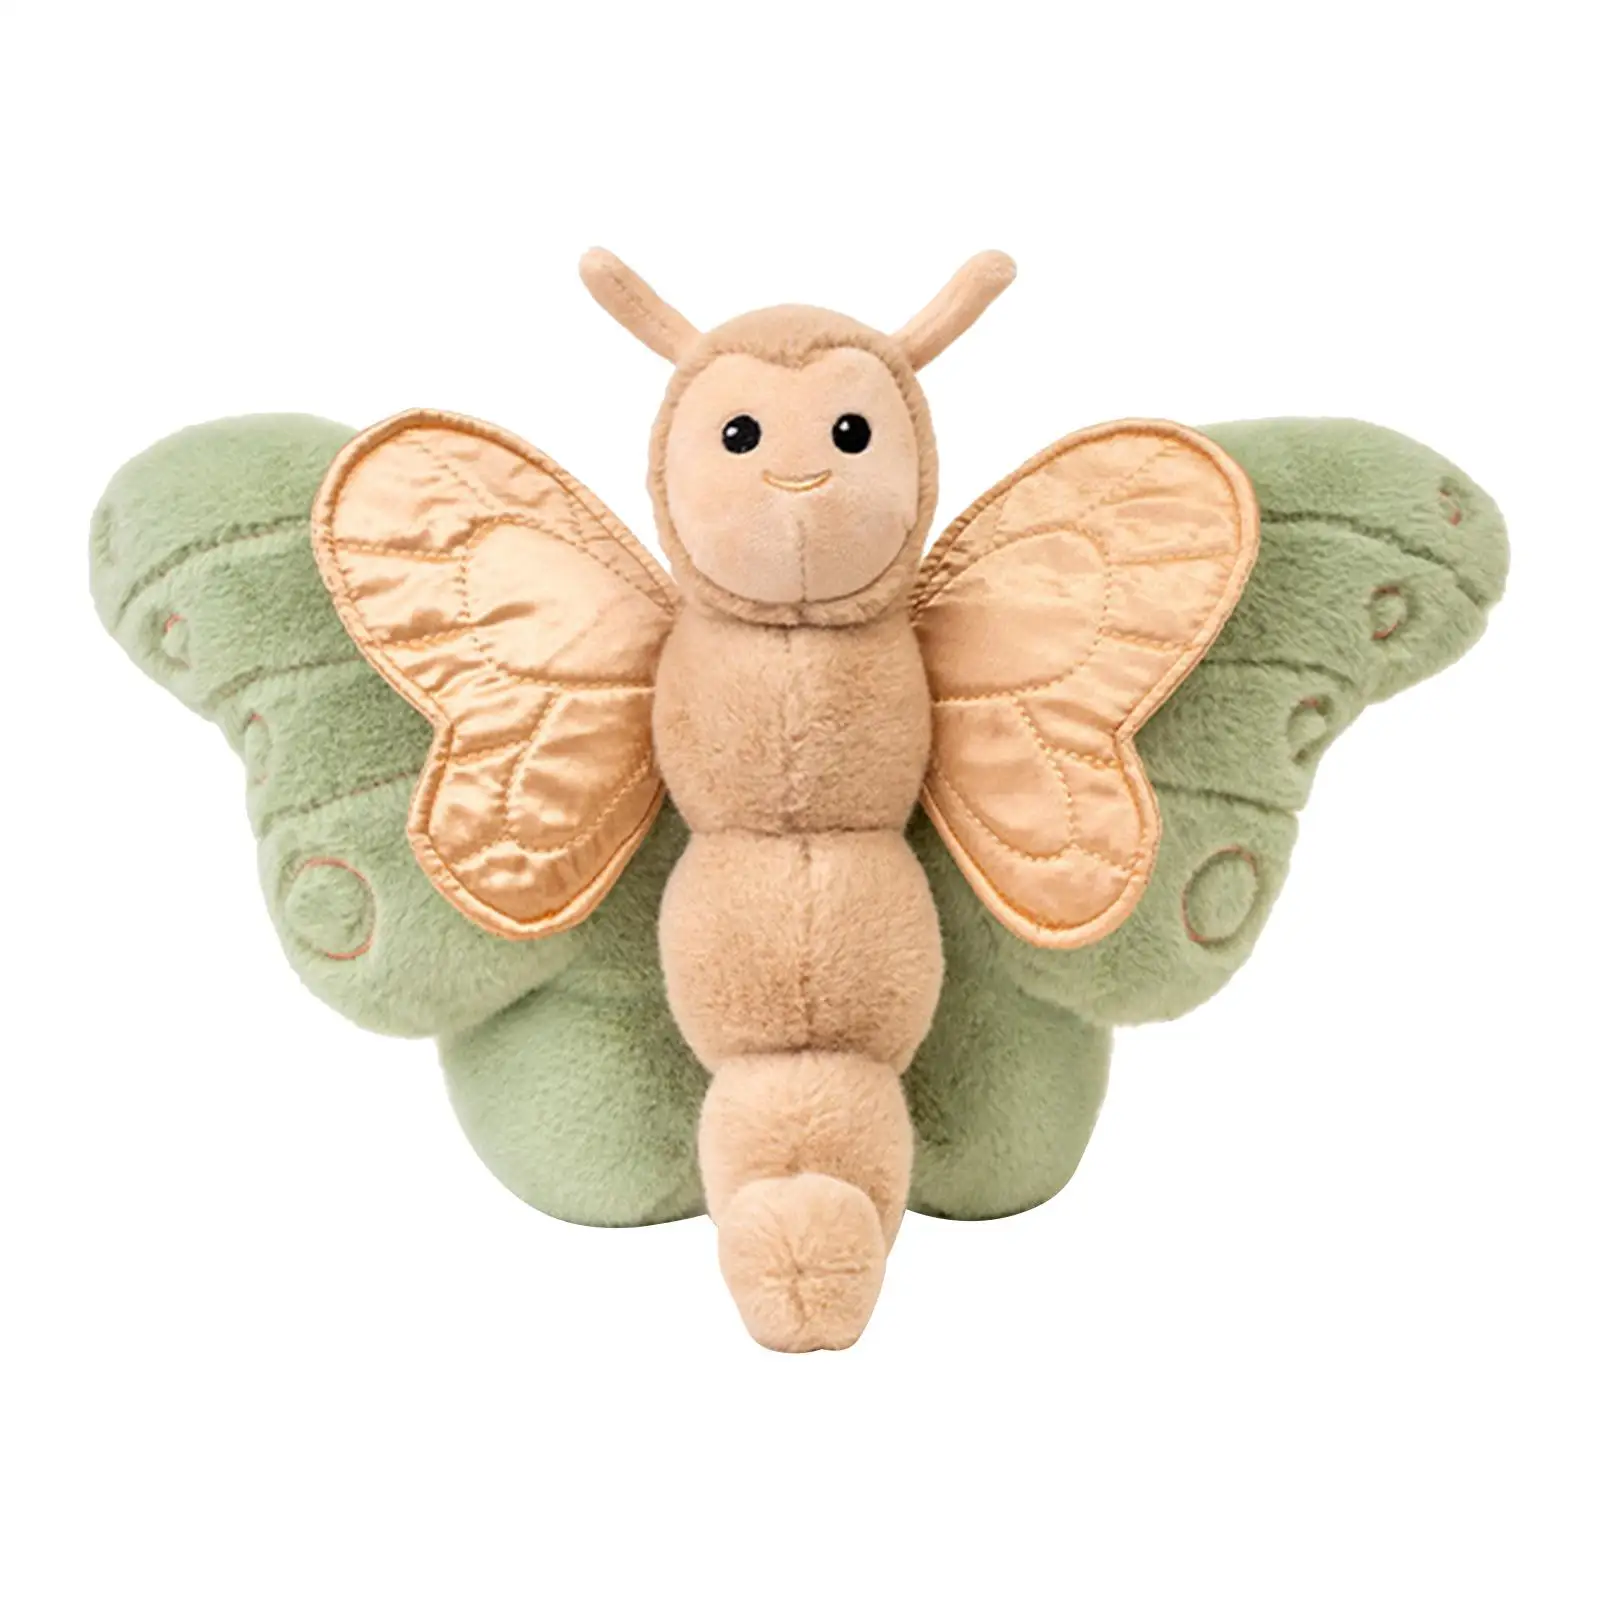 Cute Soft Butterfly Plush Pillow Toy Soothing Pillow Stuffed Animal Doll Kids